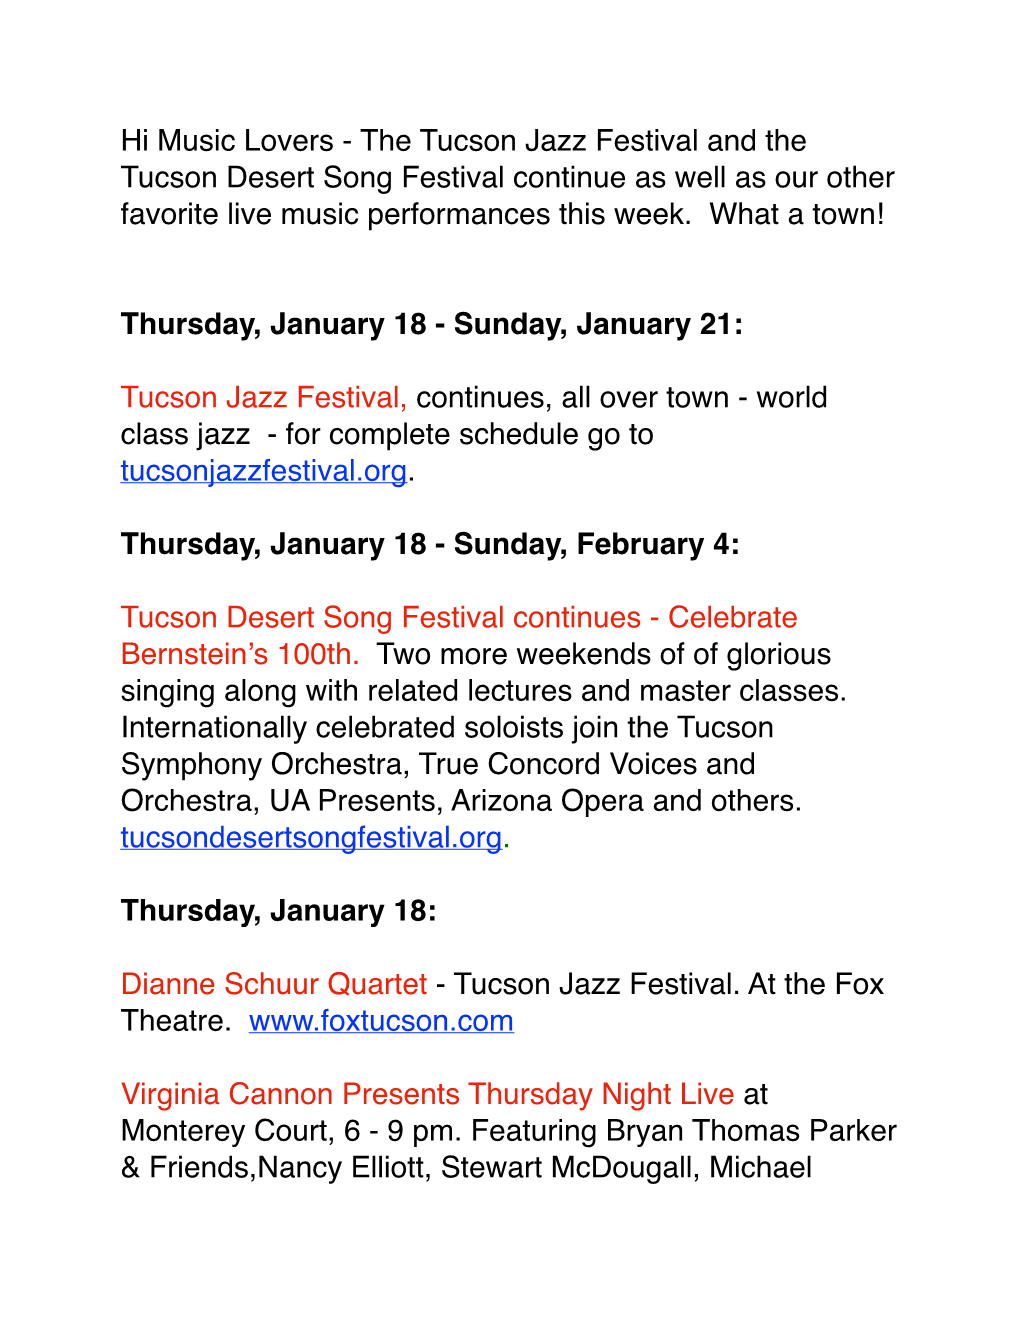 Hi Music Lovers - the Tucson Jazz Festival and the Tucson Desert Song Festival Continue As Well As Our Other Favorite Live Music Performances This Week